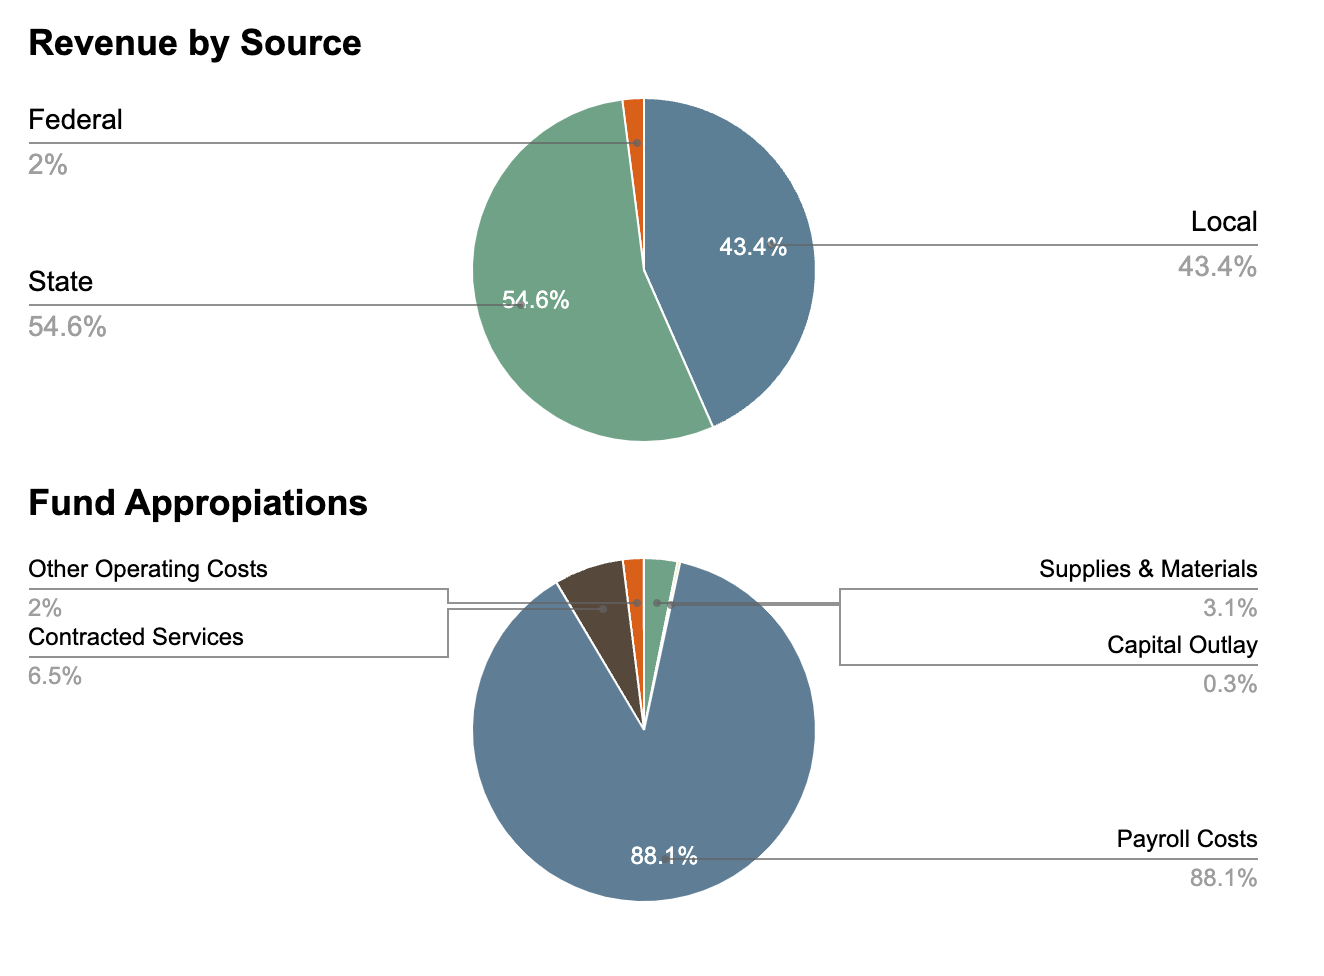 Revenue by Source and Fund Appropiations